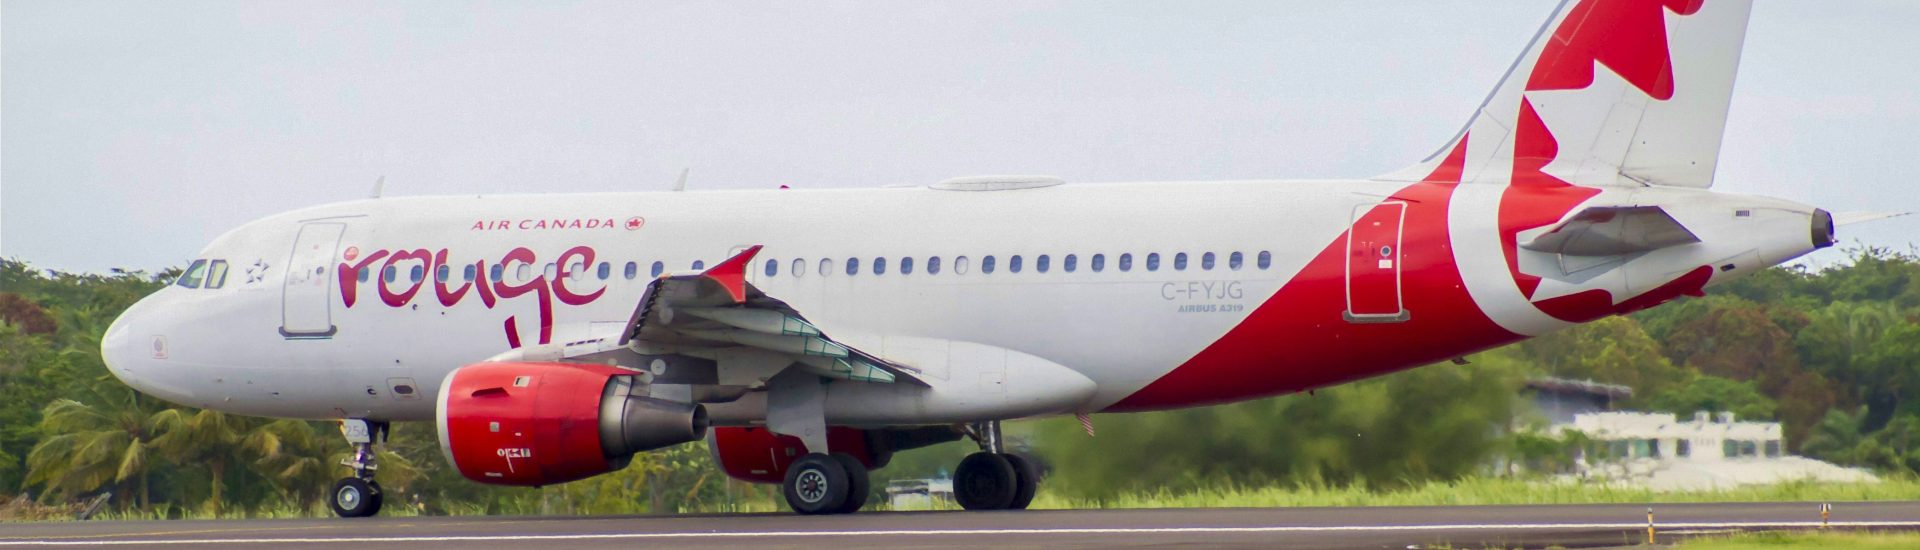 A319-100 Air Canada Rouge C-FYJG